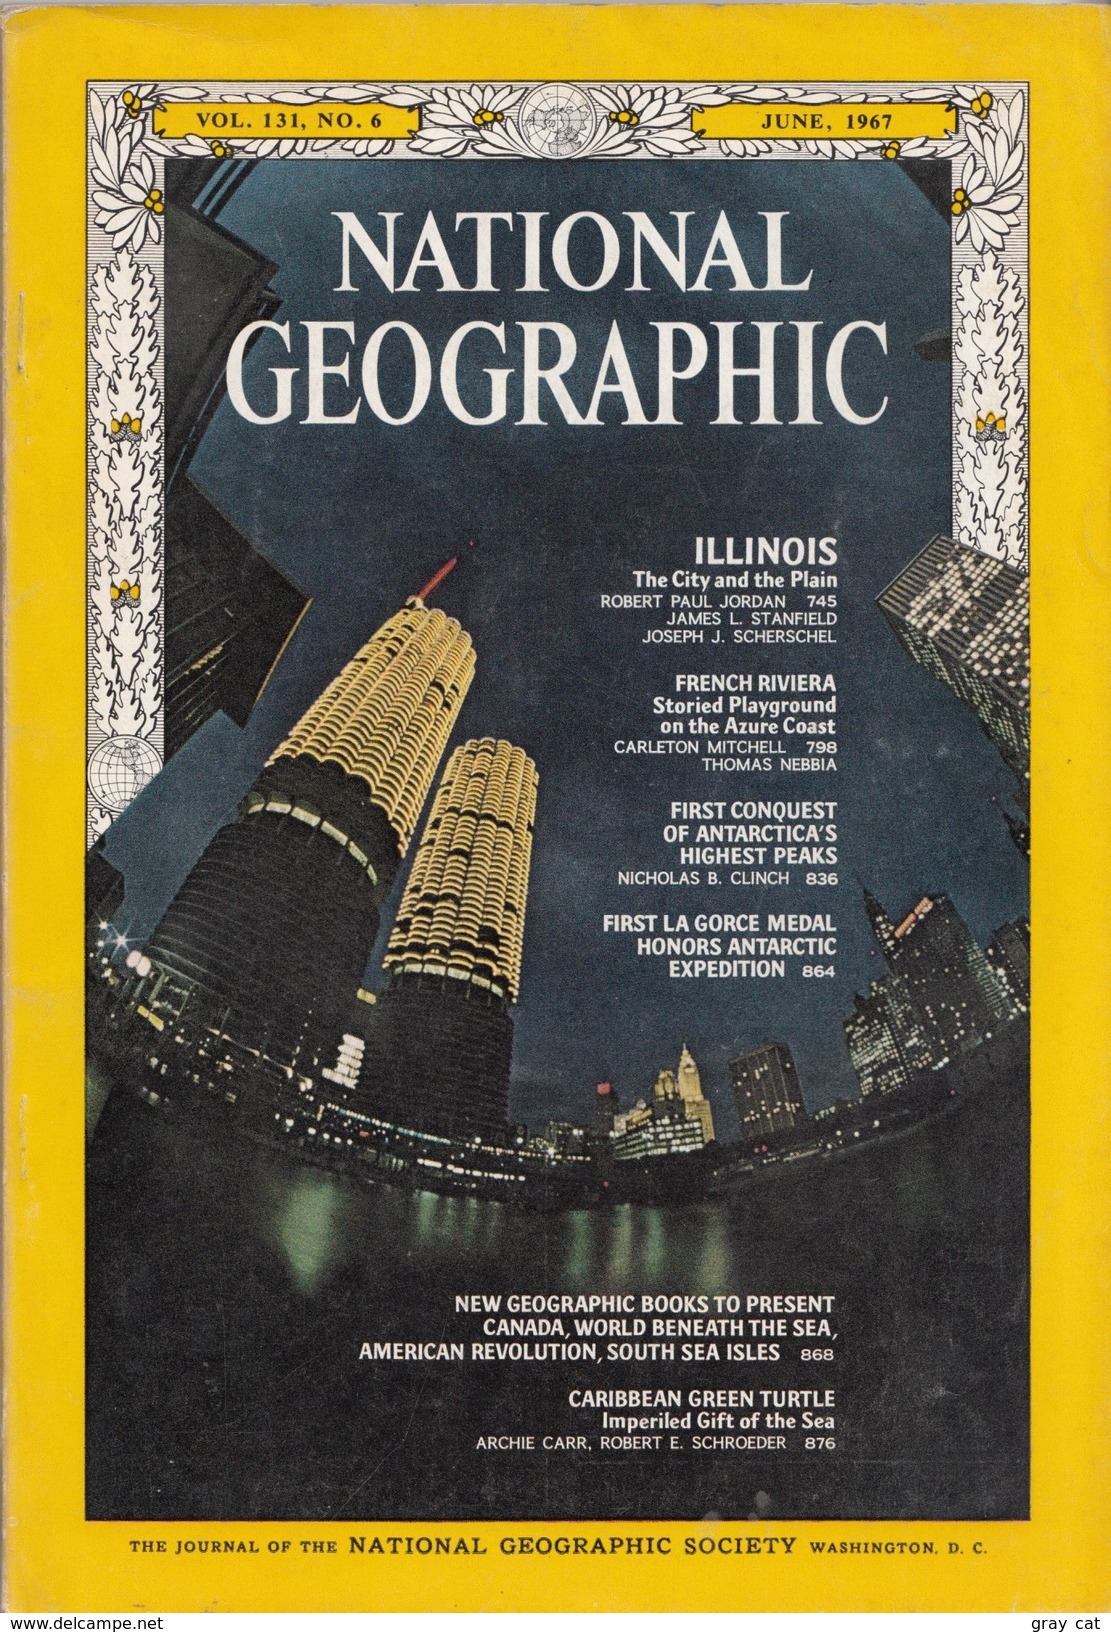 National Geographic Vol. 131 No. 6 June 1967 - Travel/ Exploration